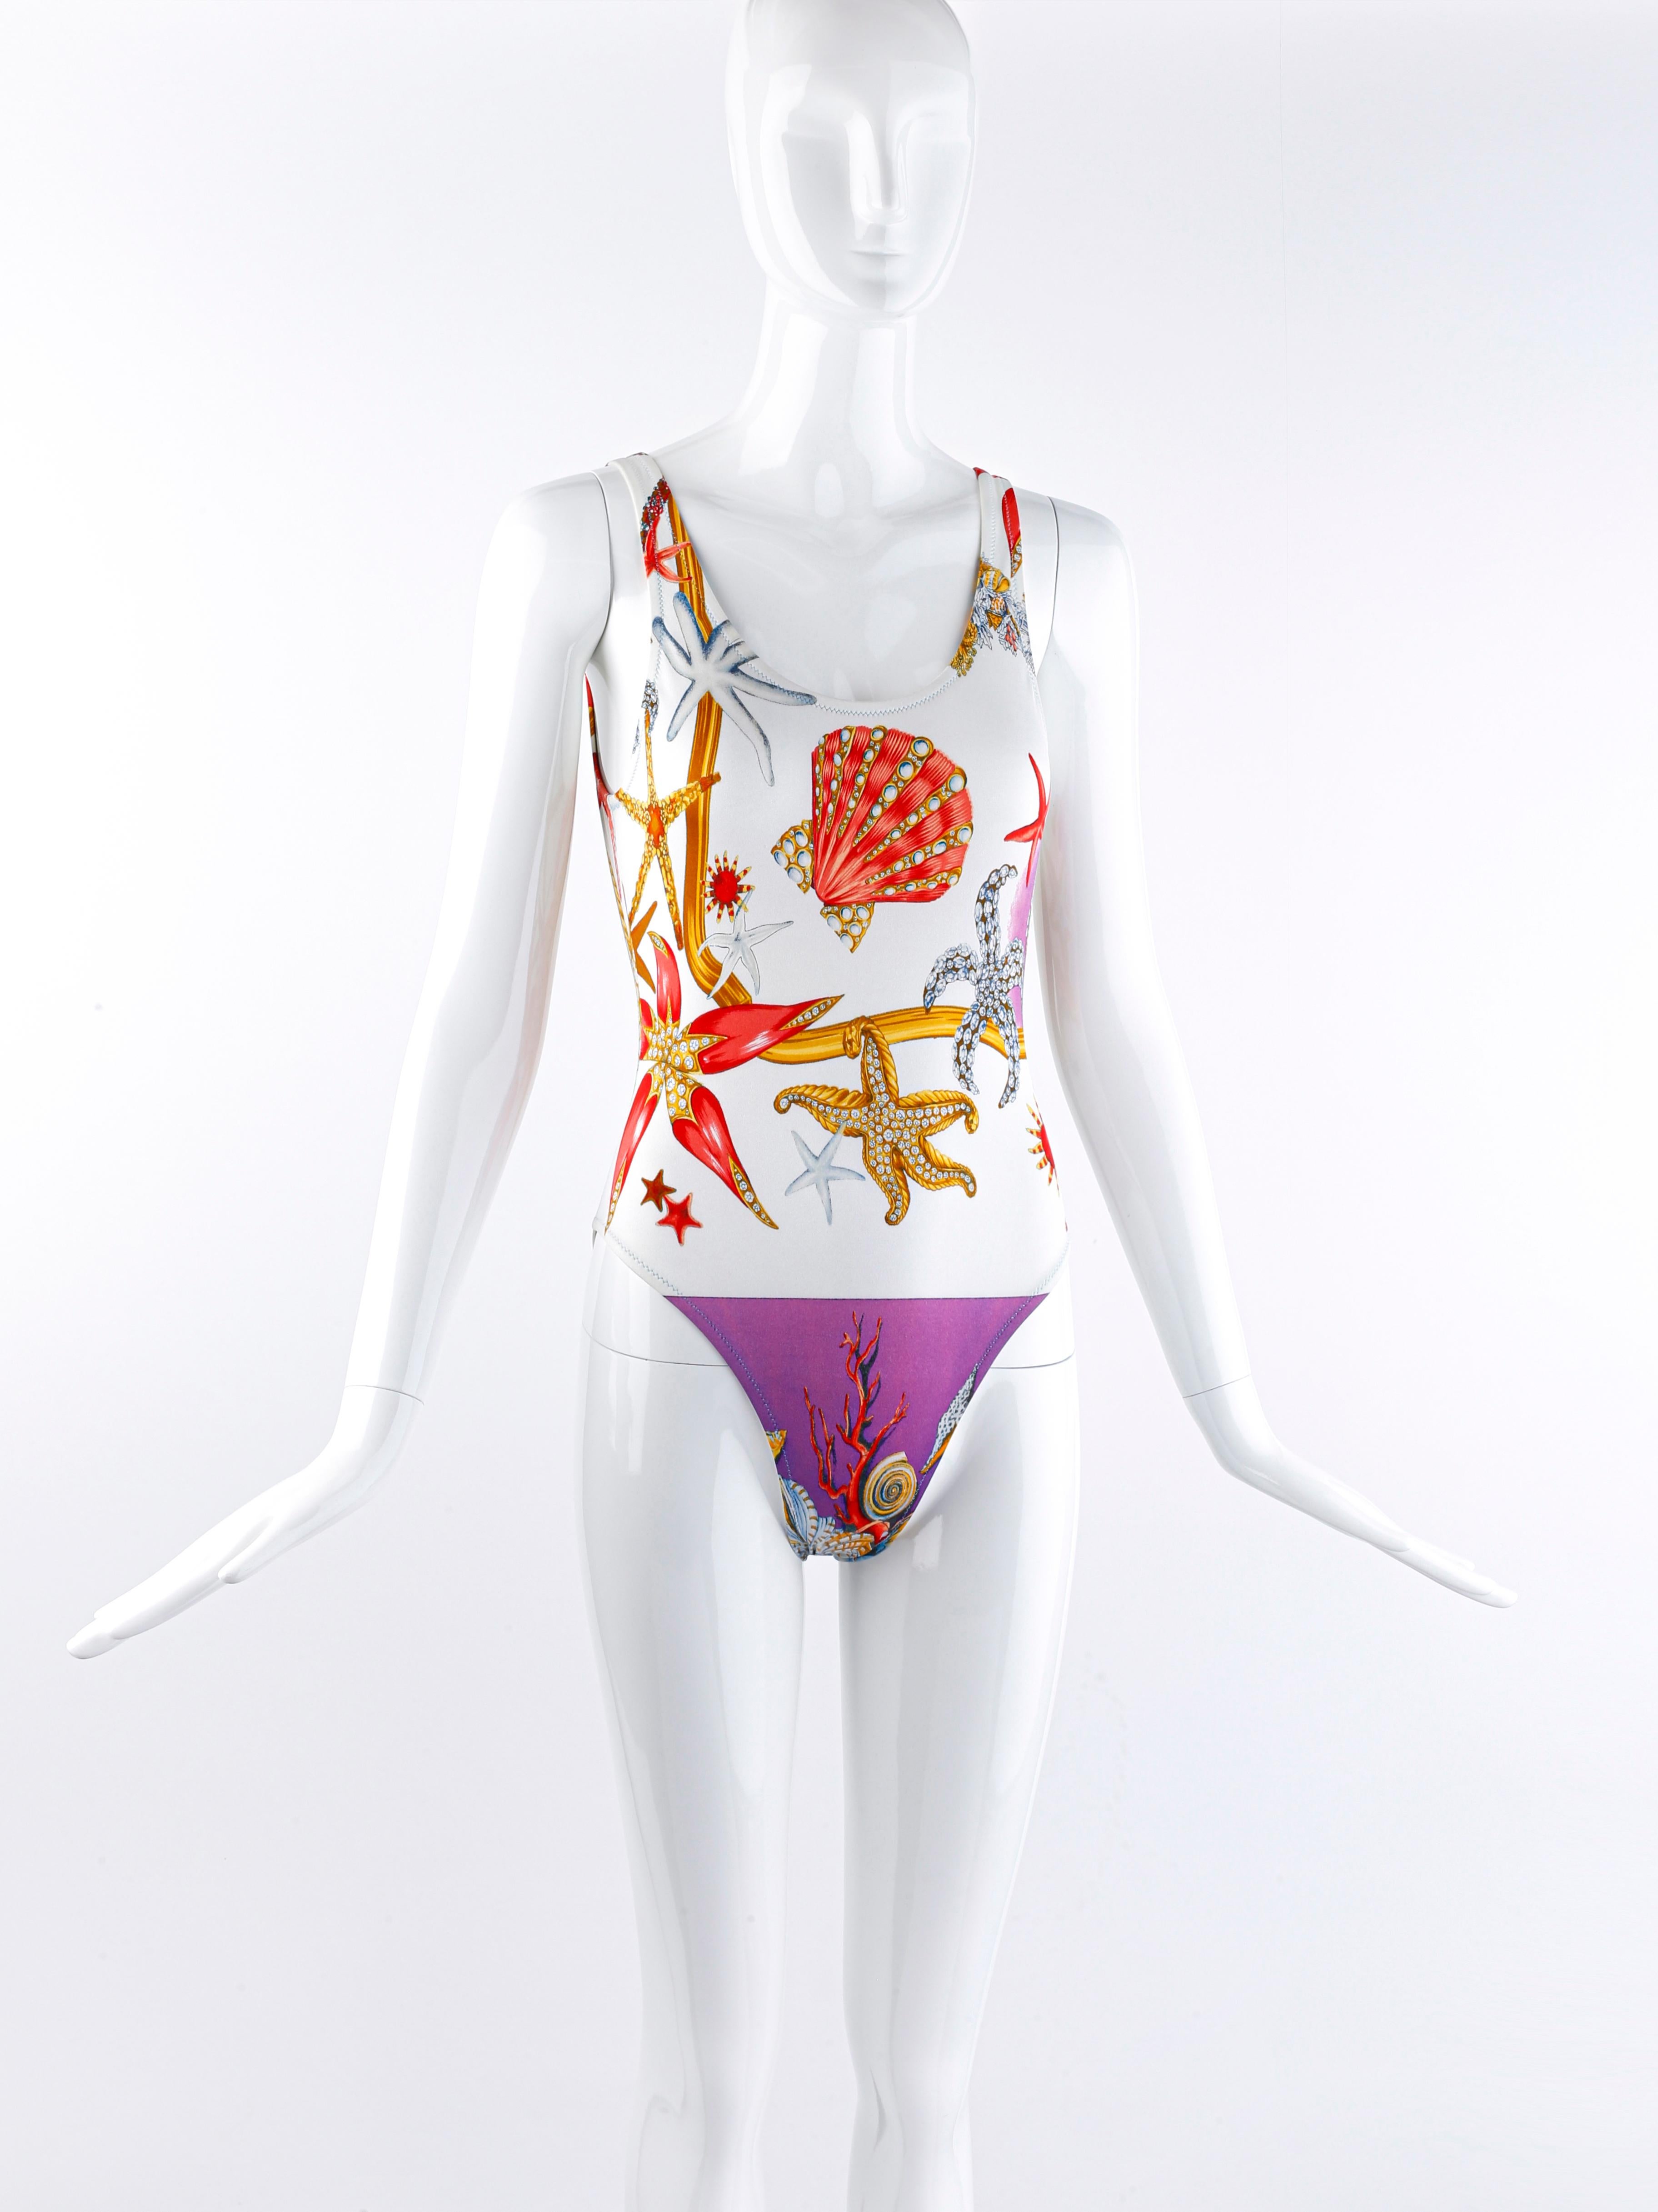 Vintage Versace Mare swimsuit by Gianni Versace for the Spring Summer 1992 collection. Same swimsuit was featured on the runway for that season. Features a collection of crystal embellished starfish, seashells, and sea life. Plunge back design. Can